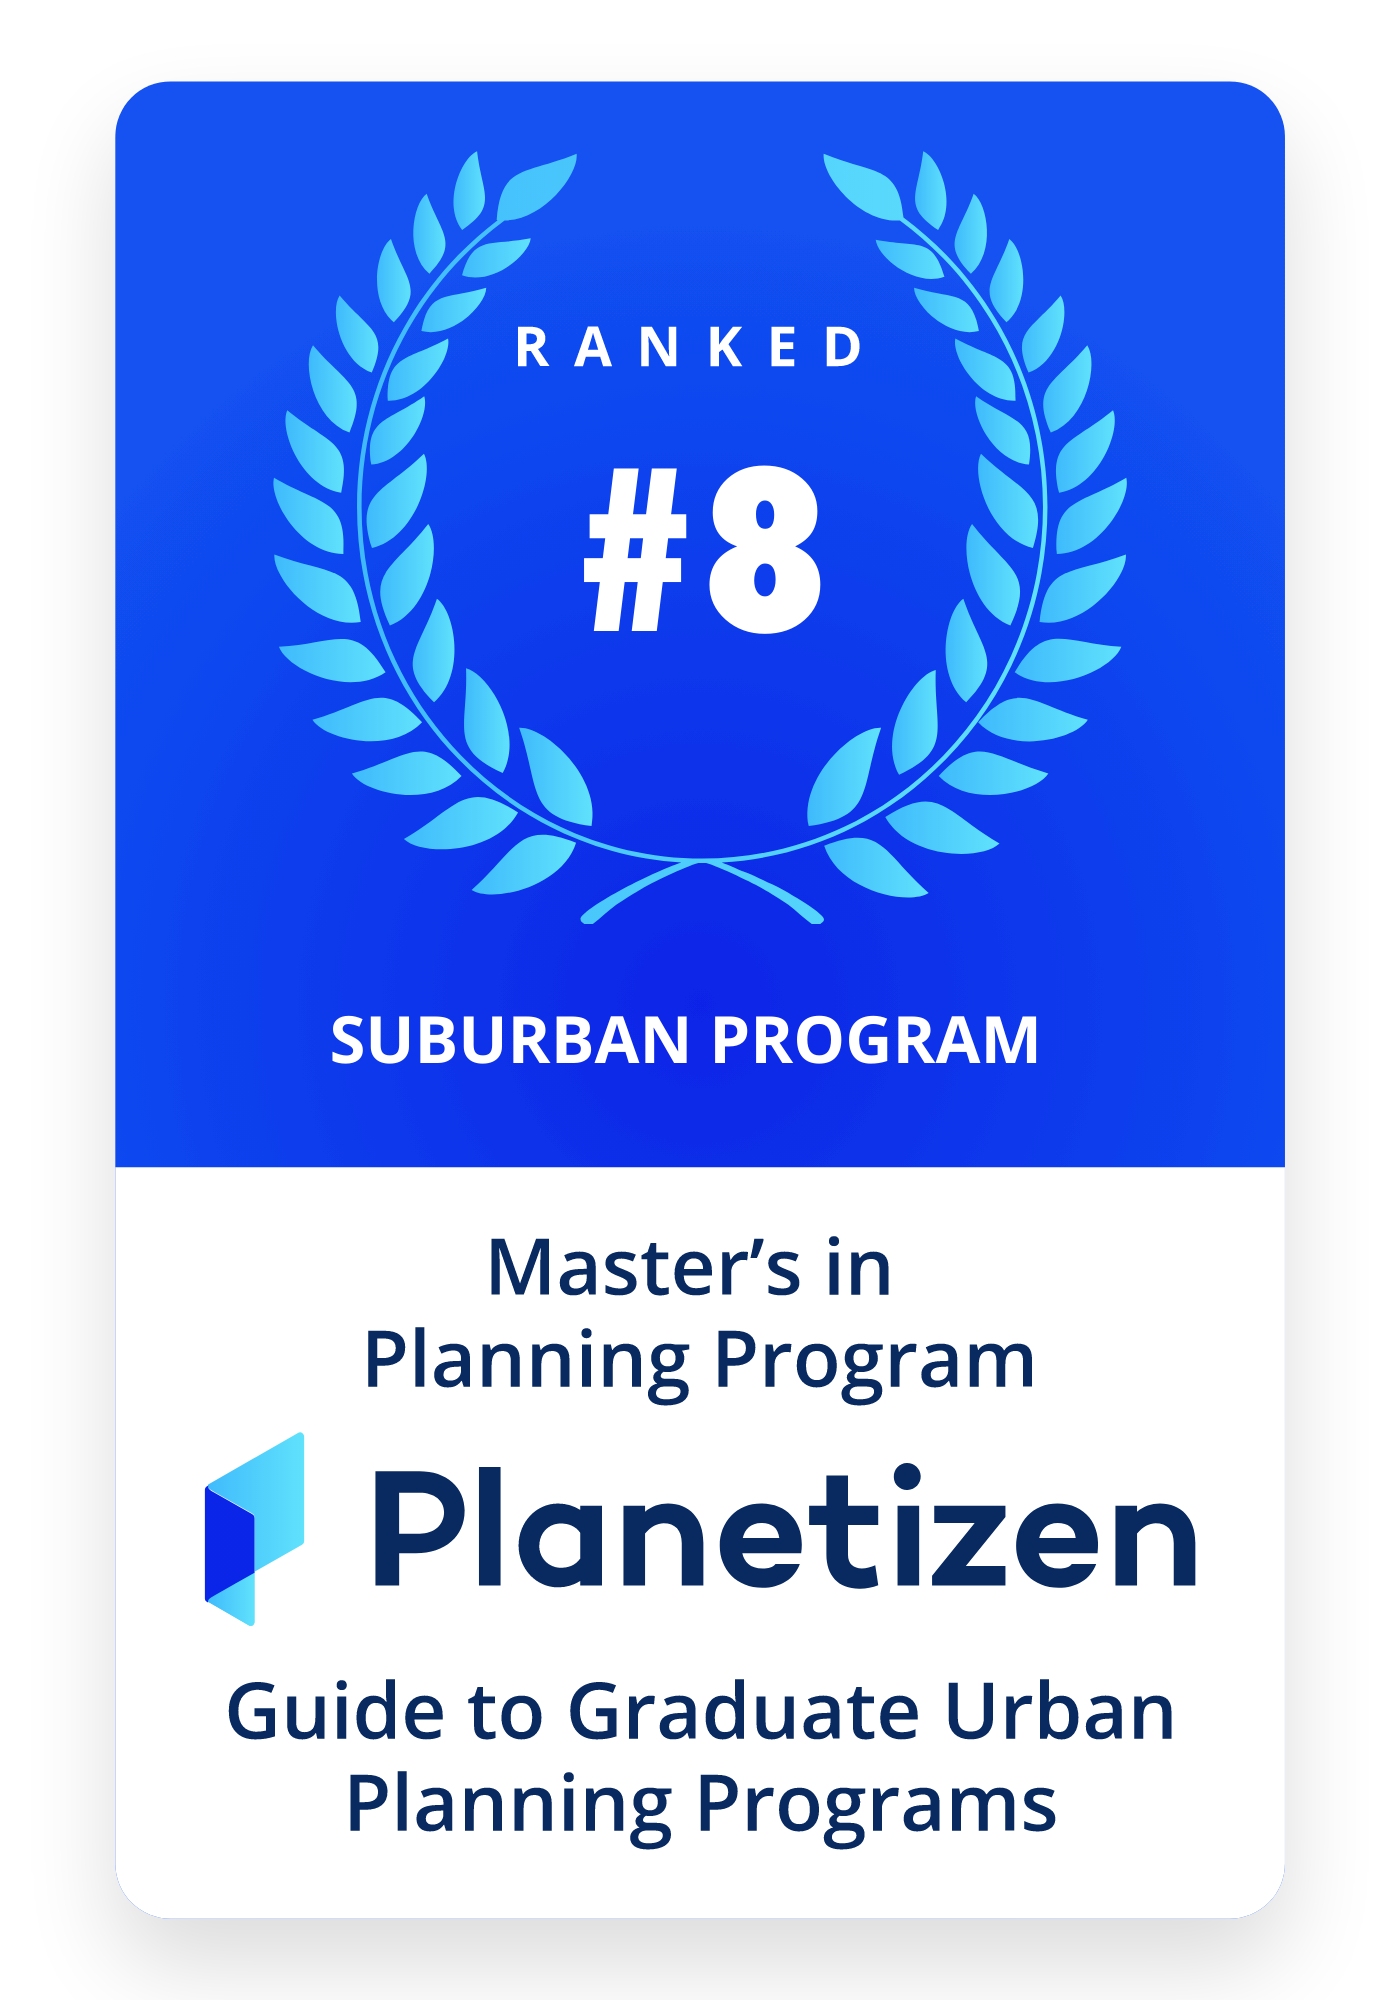 Ranking from Planetizen Guide to Graduate Urban Planning Programs